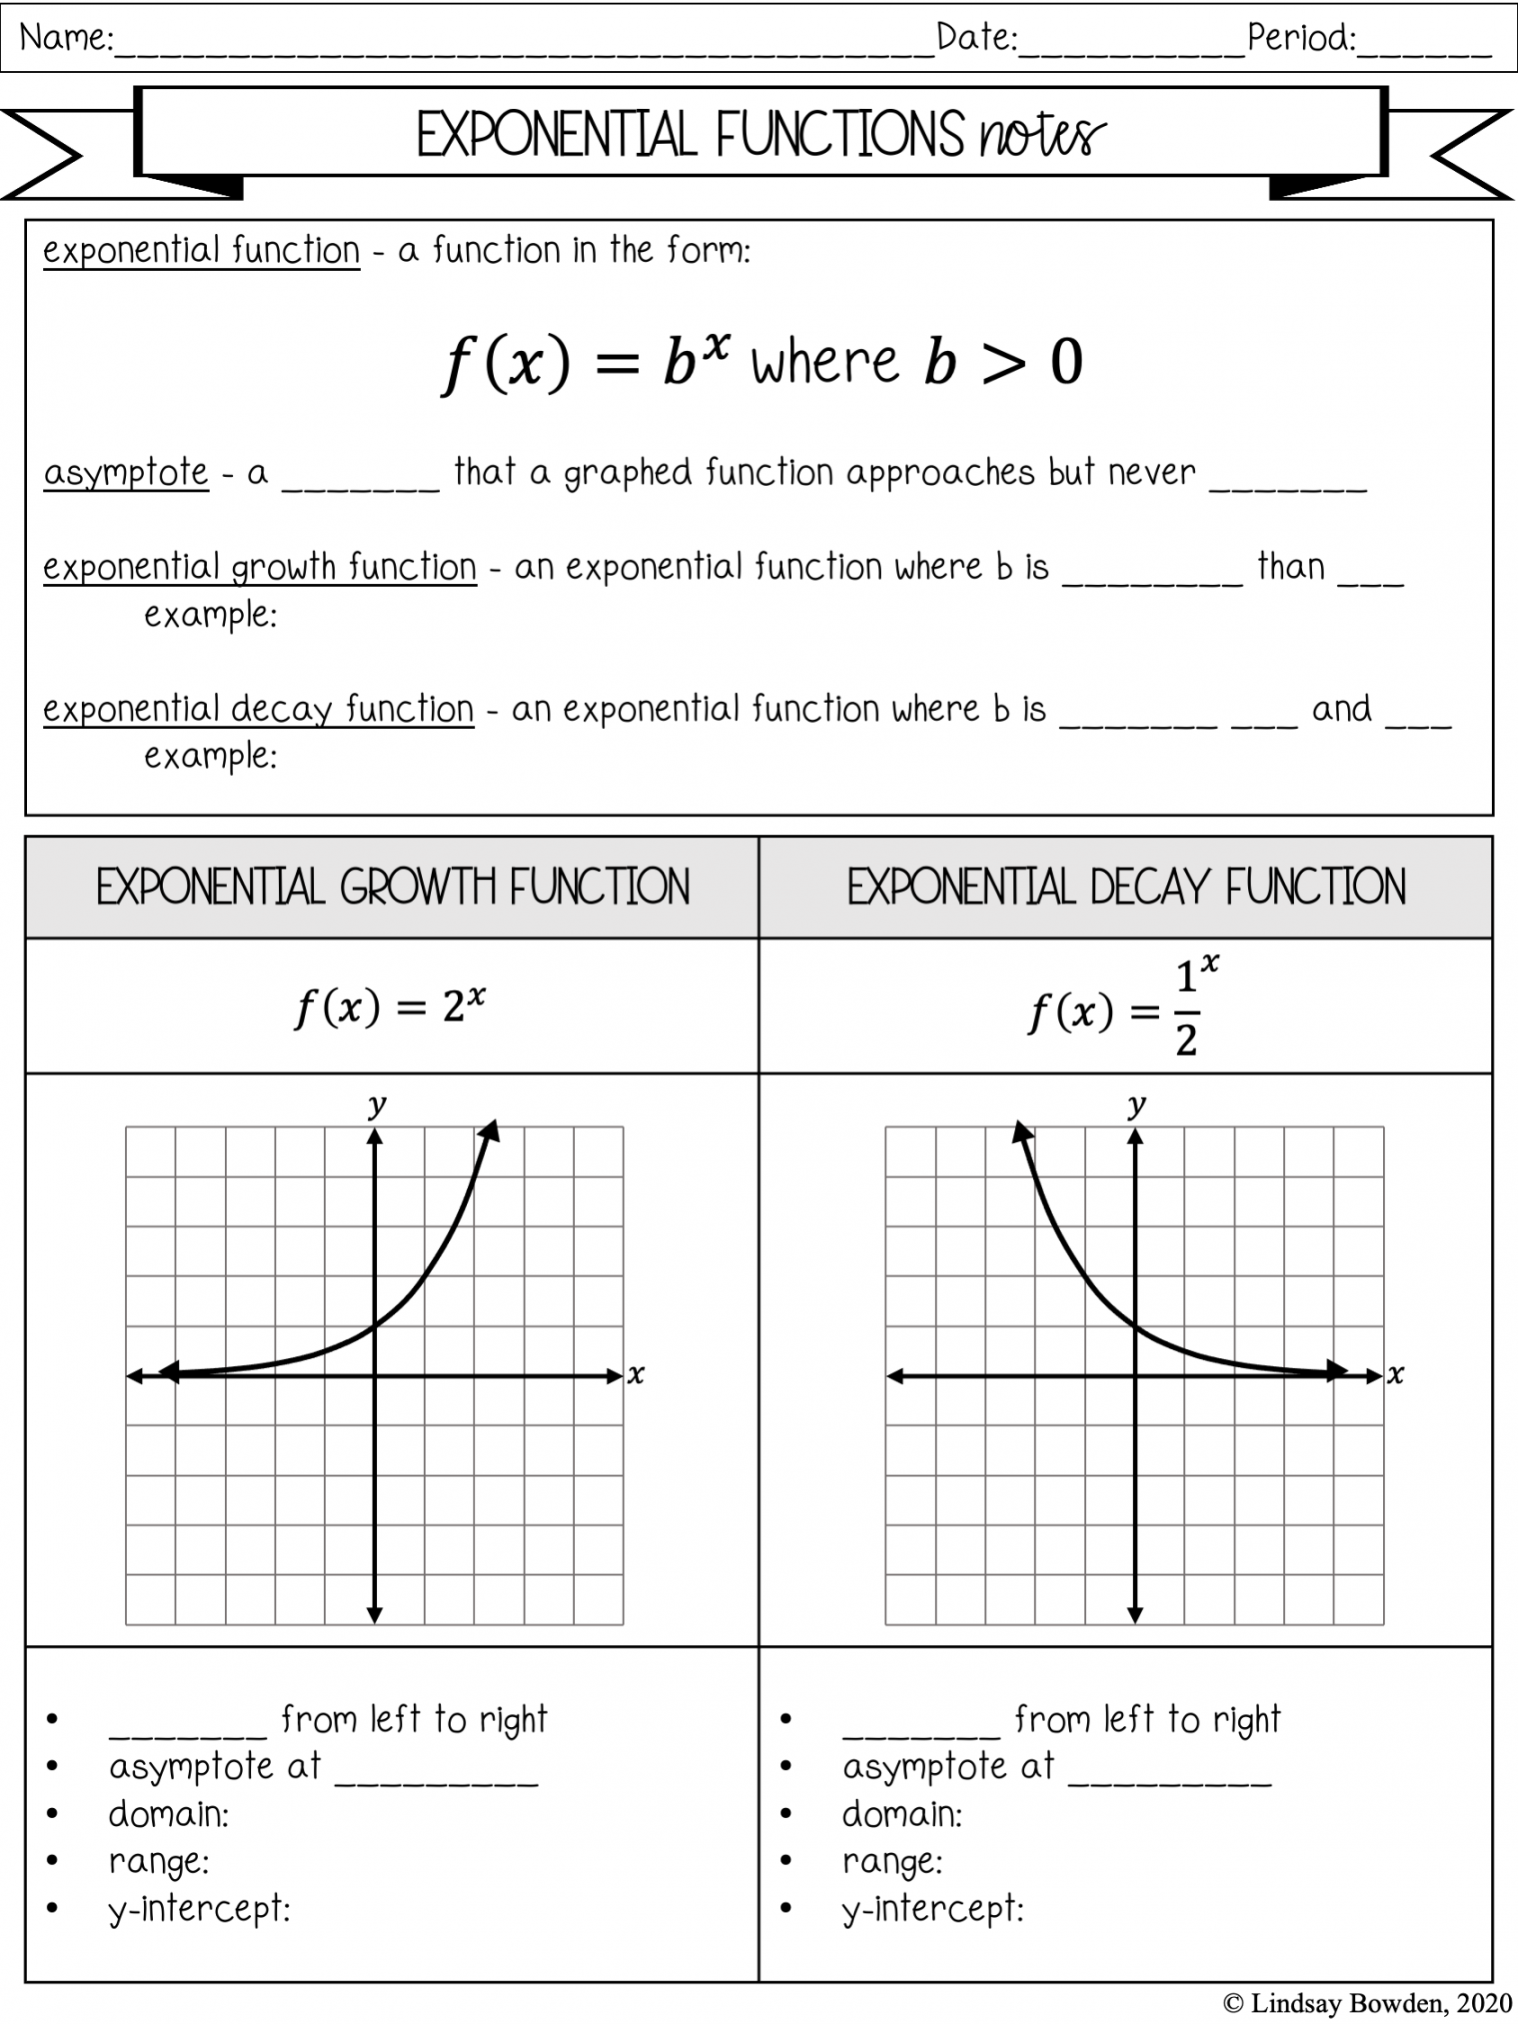 Exponential Functions Notes and Worksheets - Lindsay Bowden